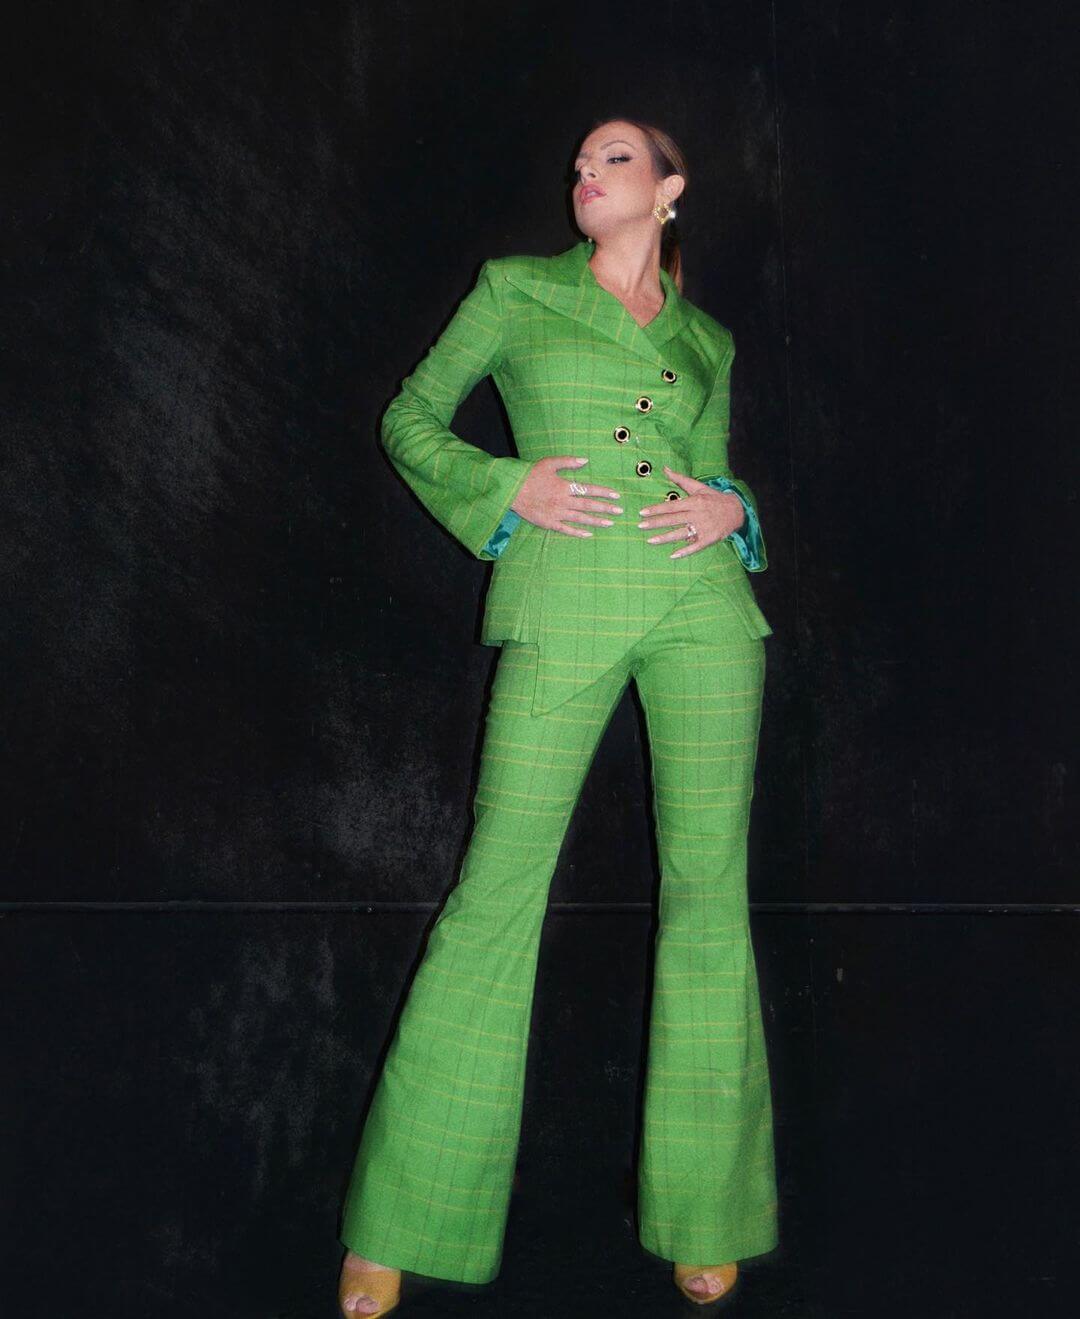 Elizabeth Gillies Made Heads Turn In Her Vibrant Green Pantsuit